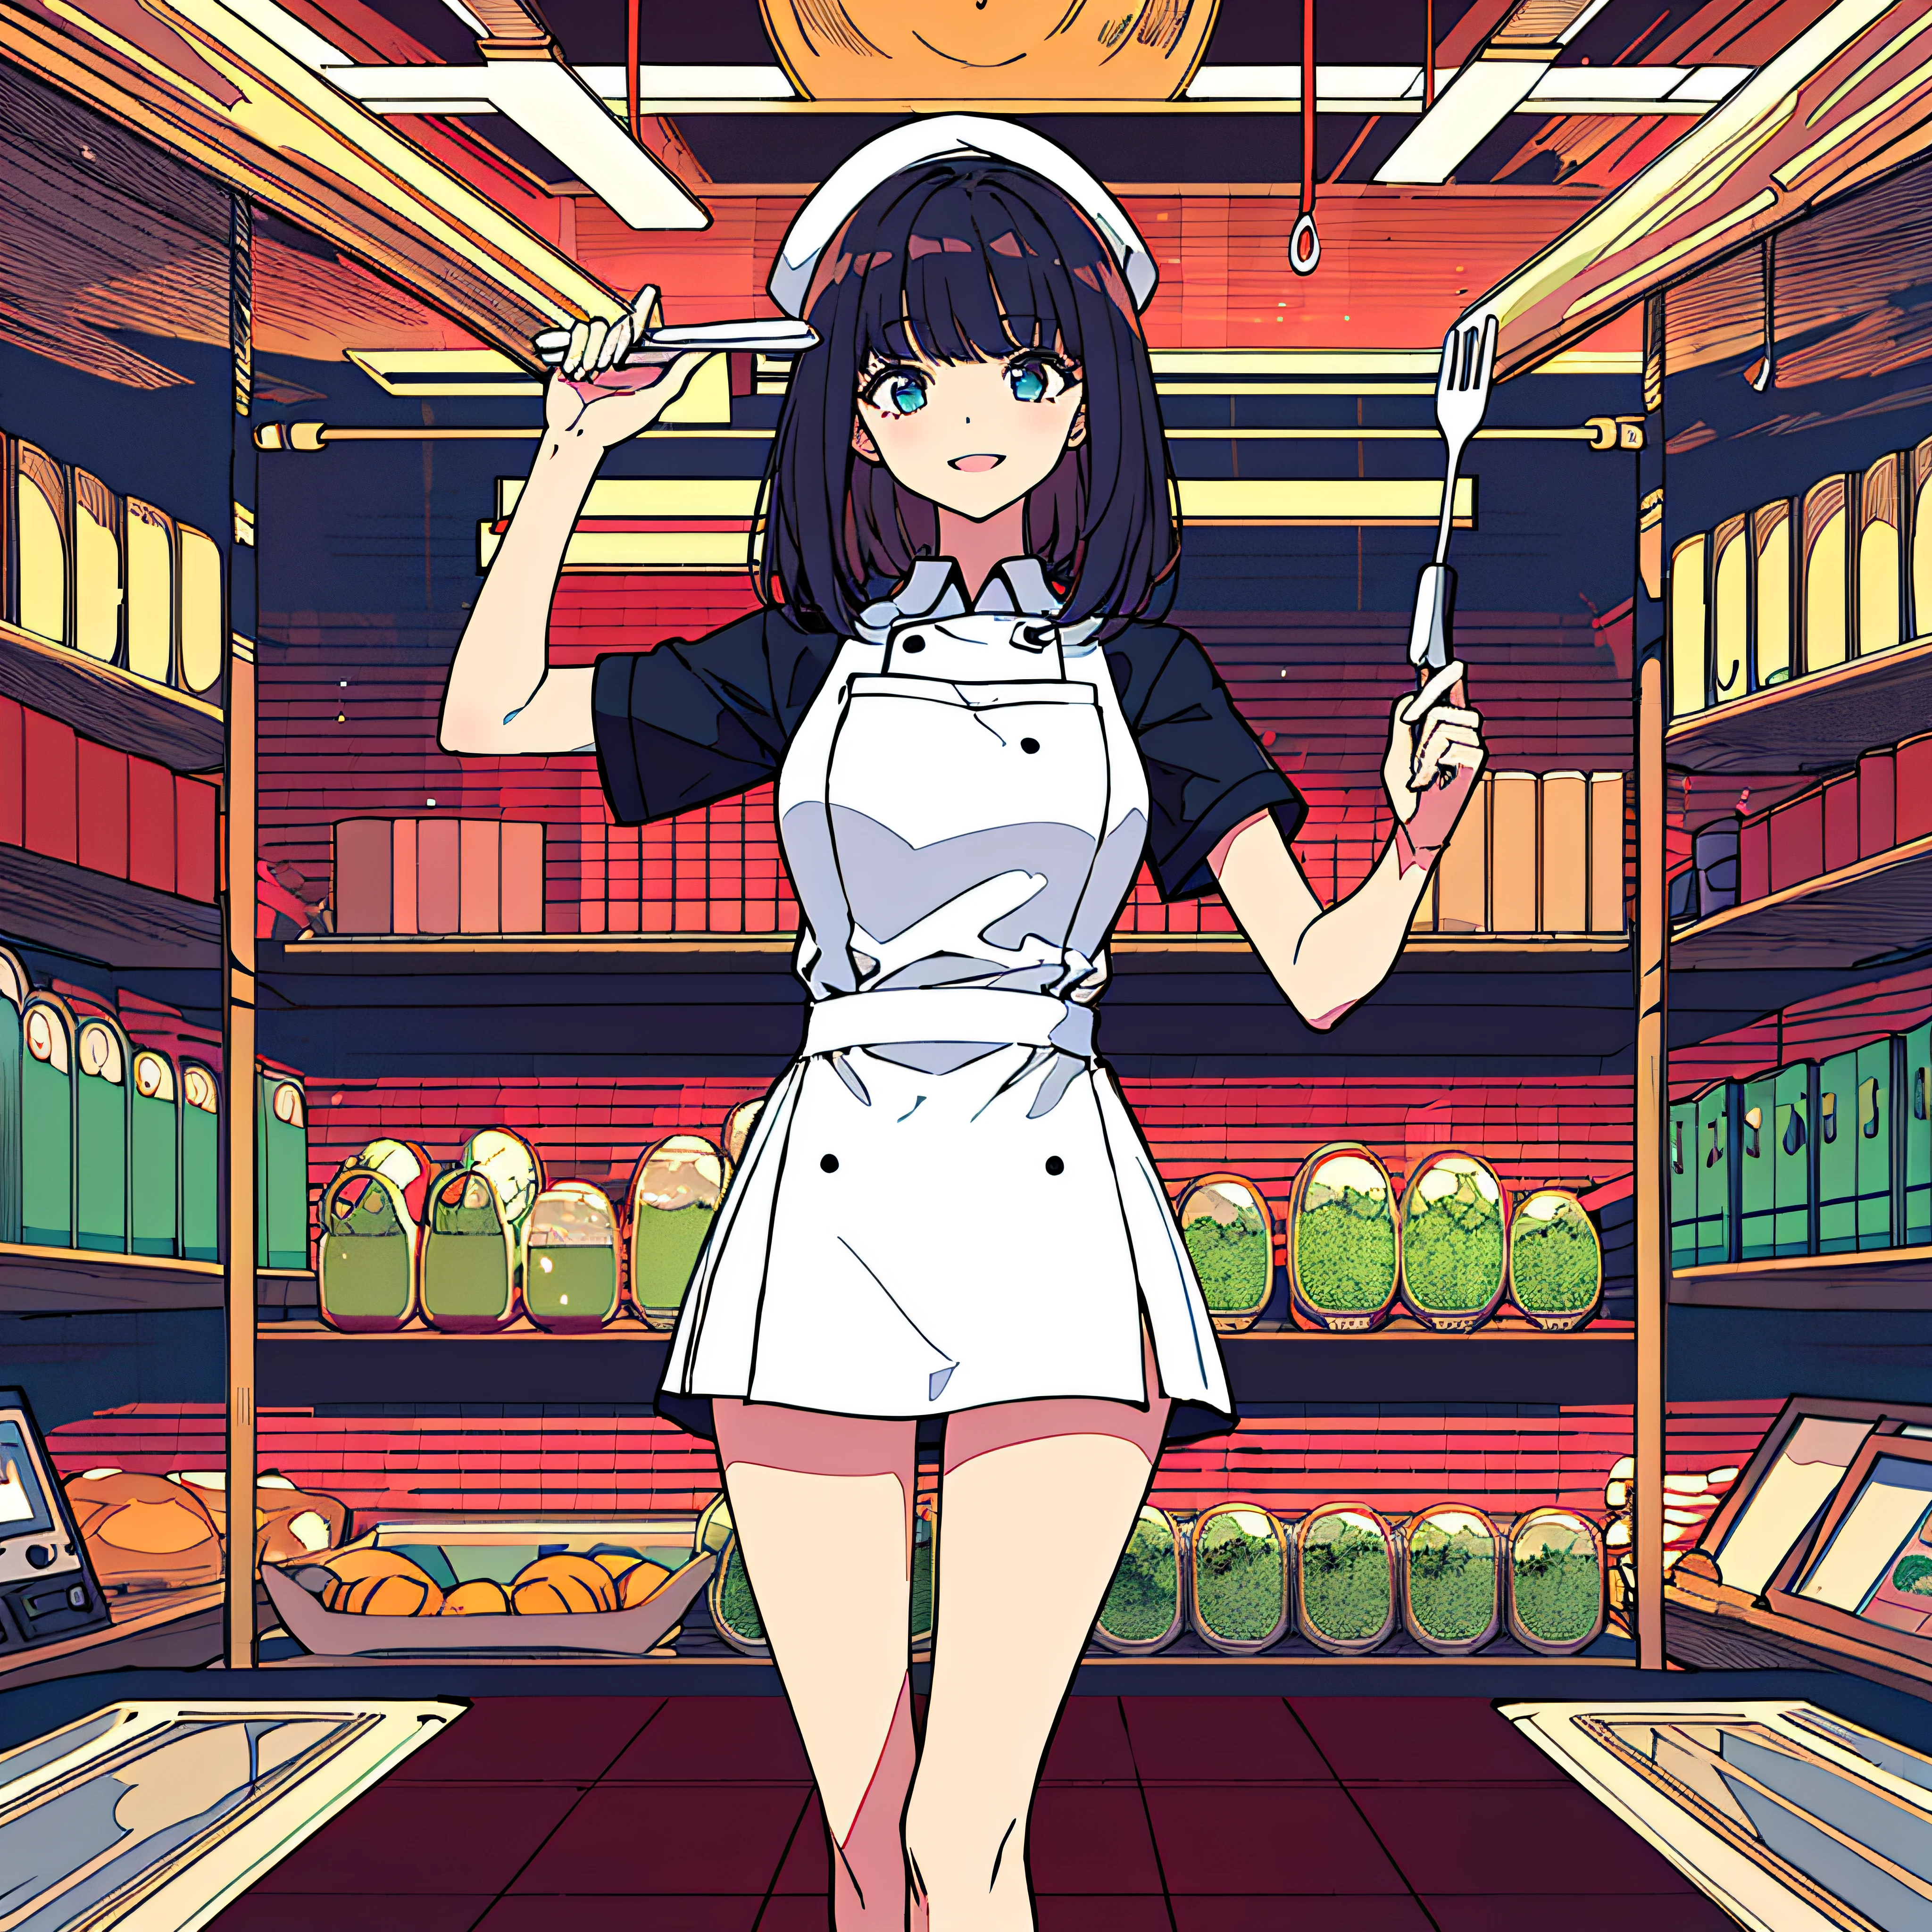 Masterpiece artwork, intricate-detail, best qualityer, captura de fully body, 1girl, Youngh, 12 years old, 独奏, fully body, mid hair, bangss, Bblack hair, slickedback hair, blue colored eyes, Girl standing, ssmile, cook outfit, Italian chef uniform, looking at side, looking at someone else, from sideways, girl in profile looking at side, garota from sideways, girl in profile, Red and white sneakers, long sleeves, perfil, holding a spatula,holding a frying pan, Head Chef Hat,